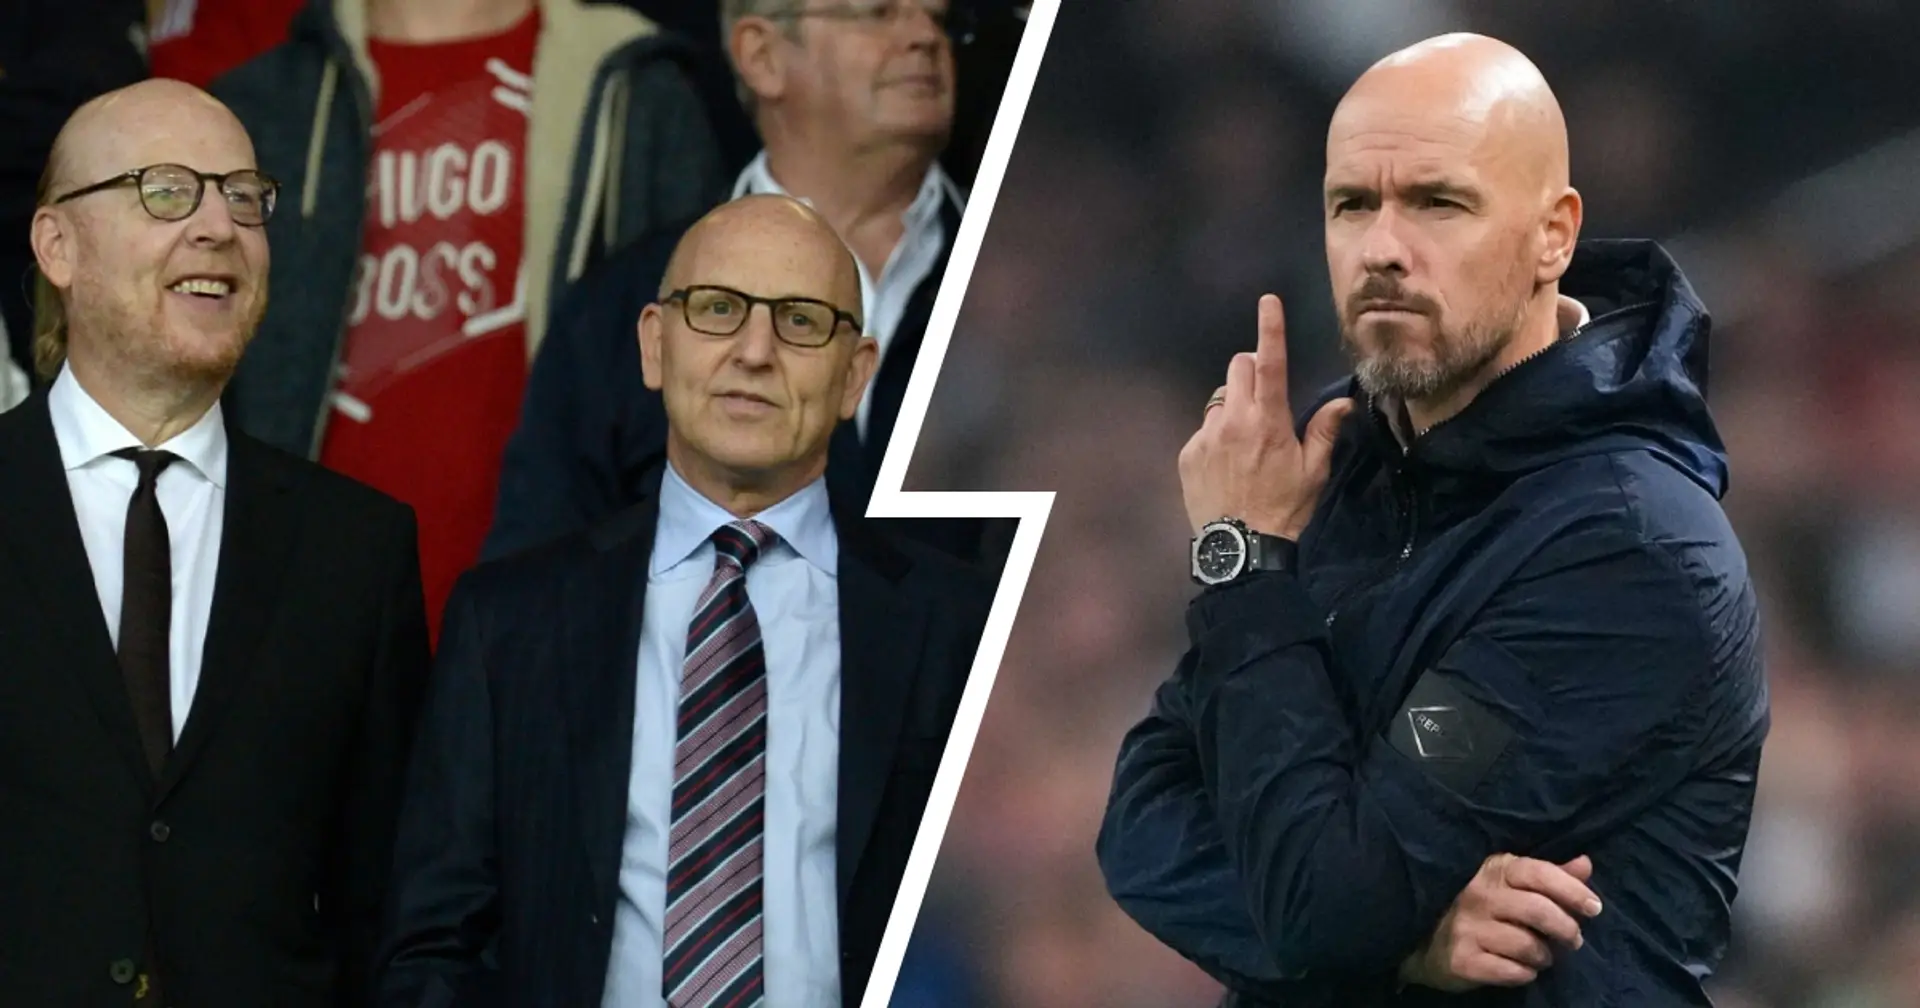 Times: Ten Hag spoke with the Glazers before making Man United decision (reliability: 5 stars)